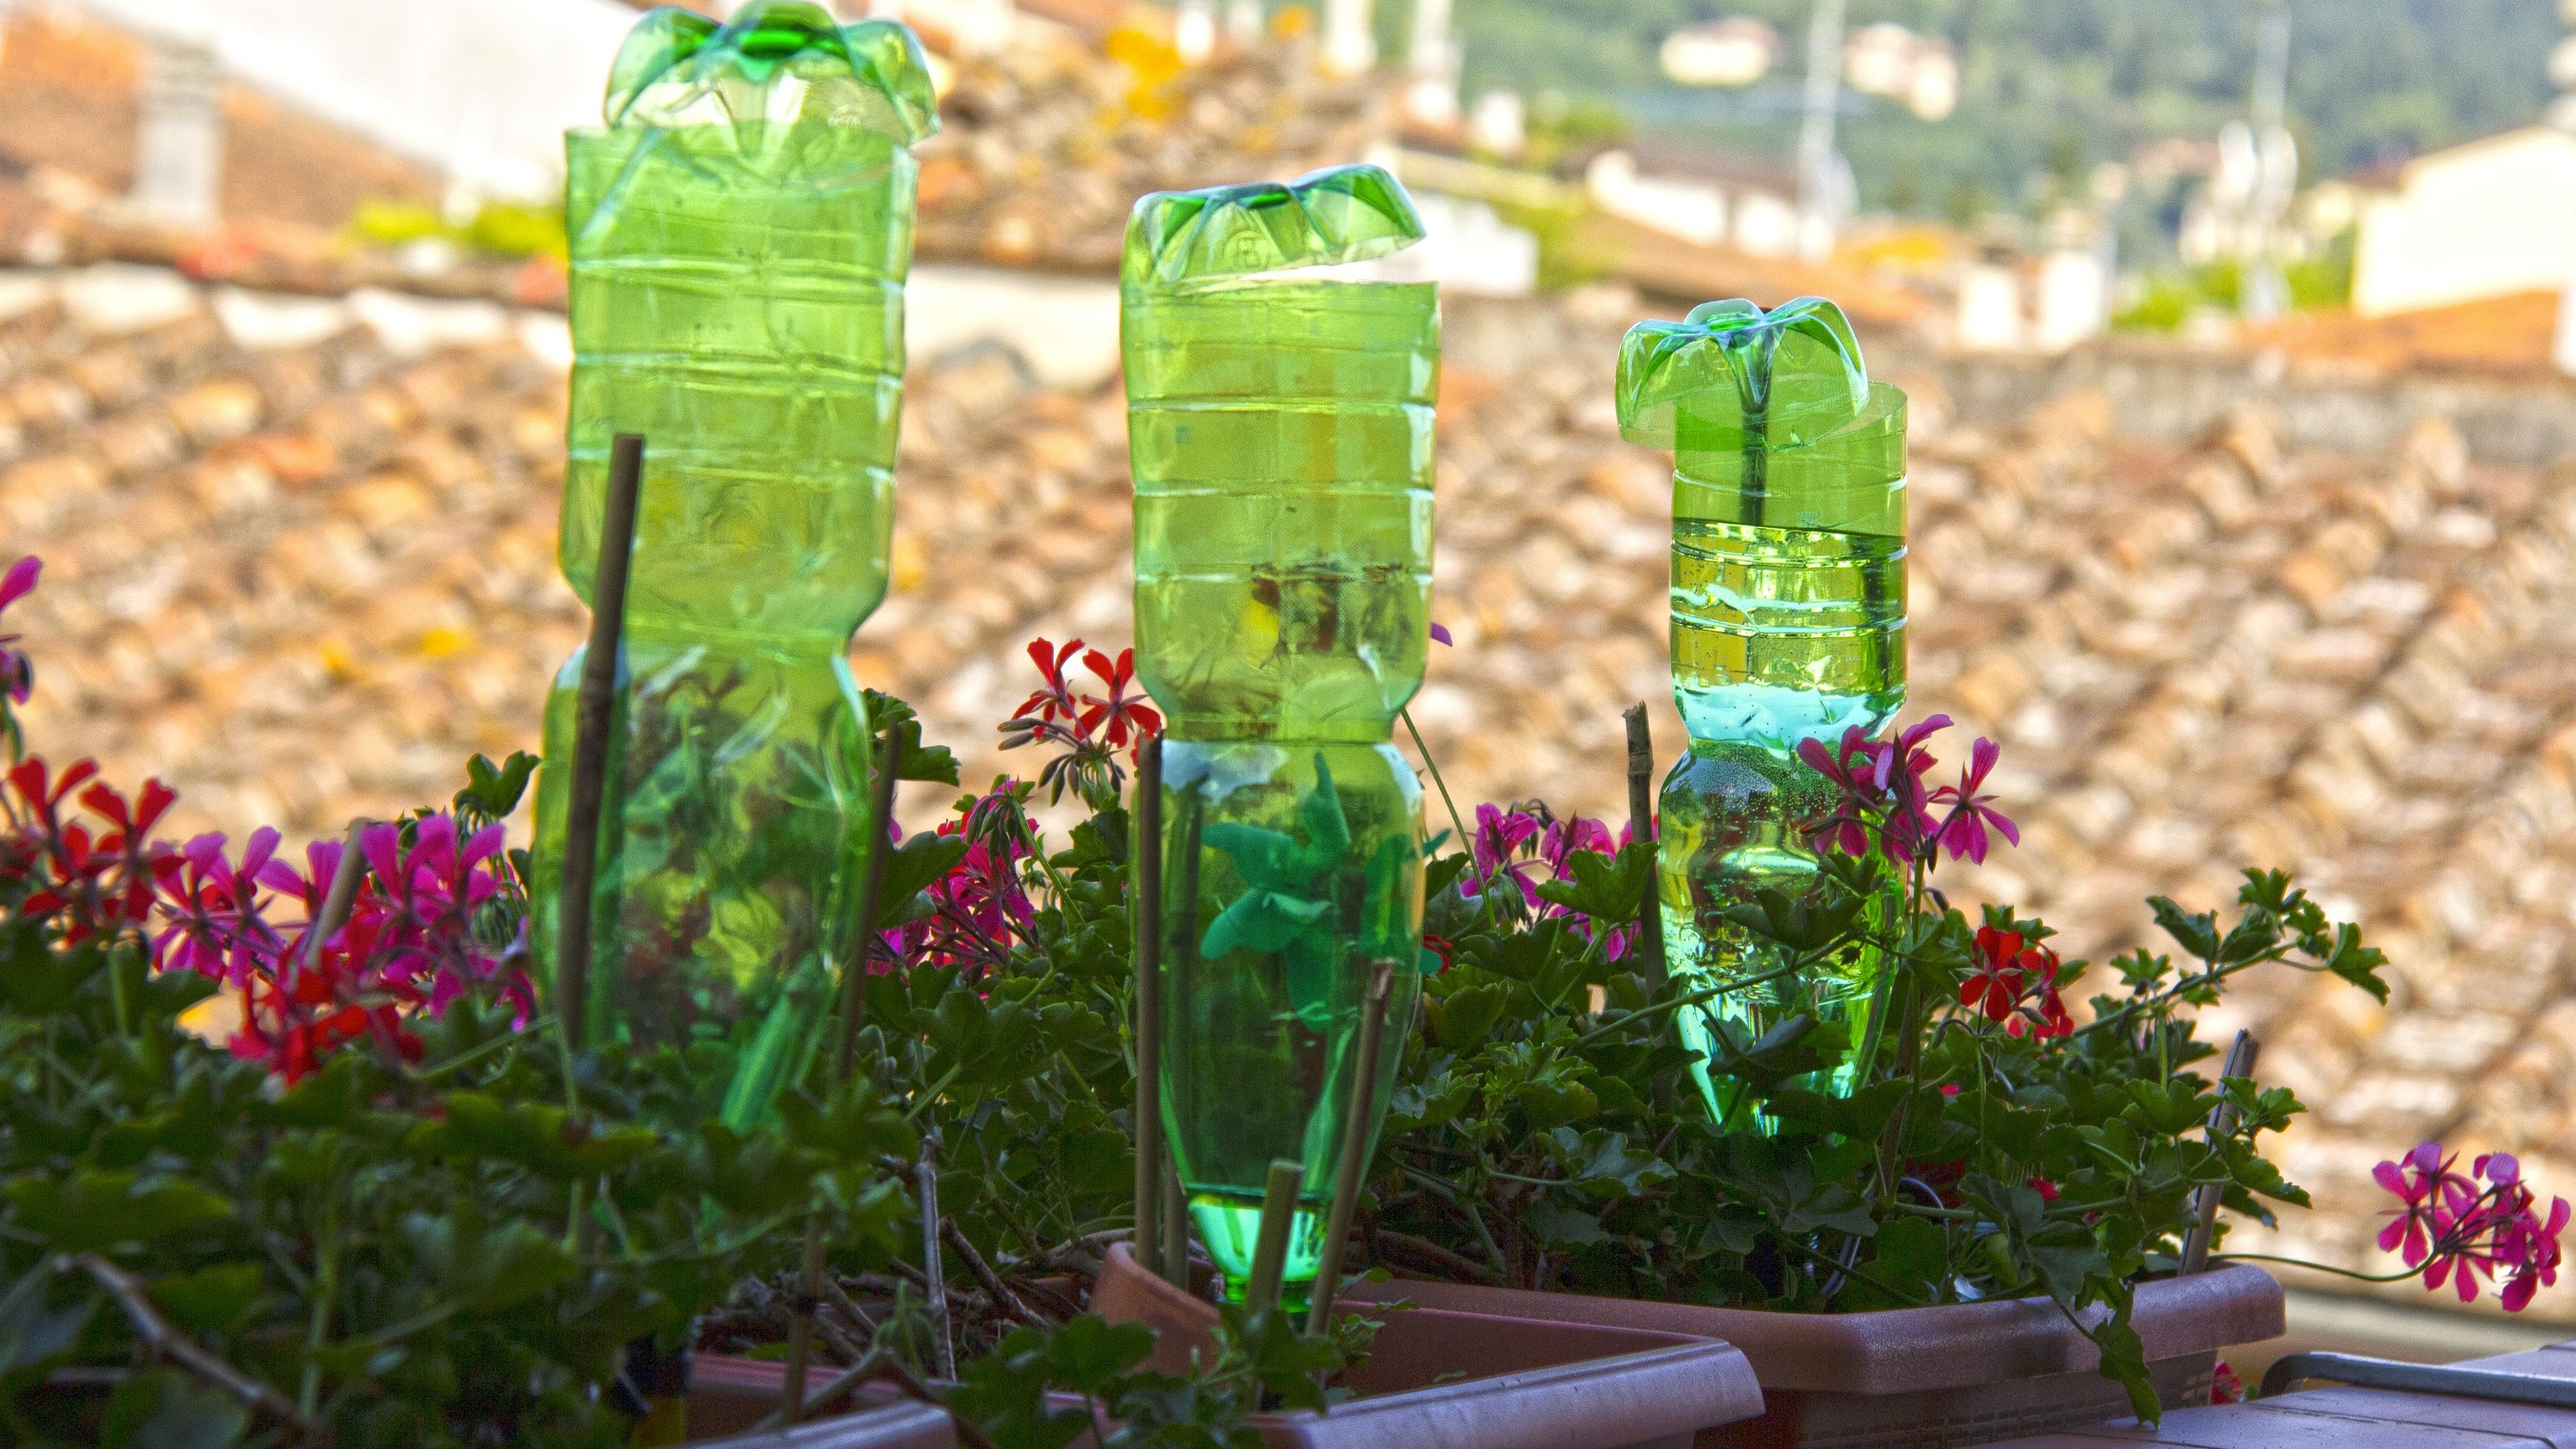 Plastic bottles for watering flowers on the balcony as an irrigation system.
